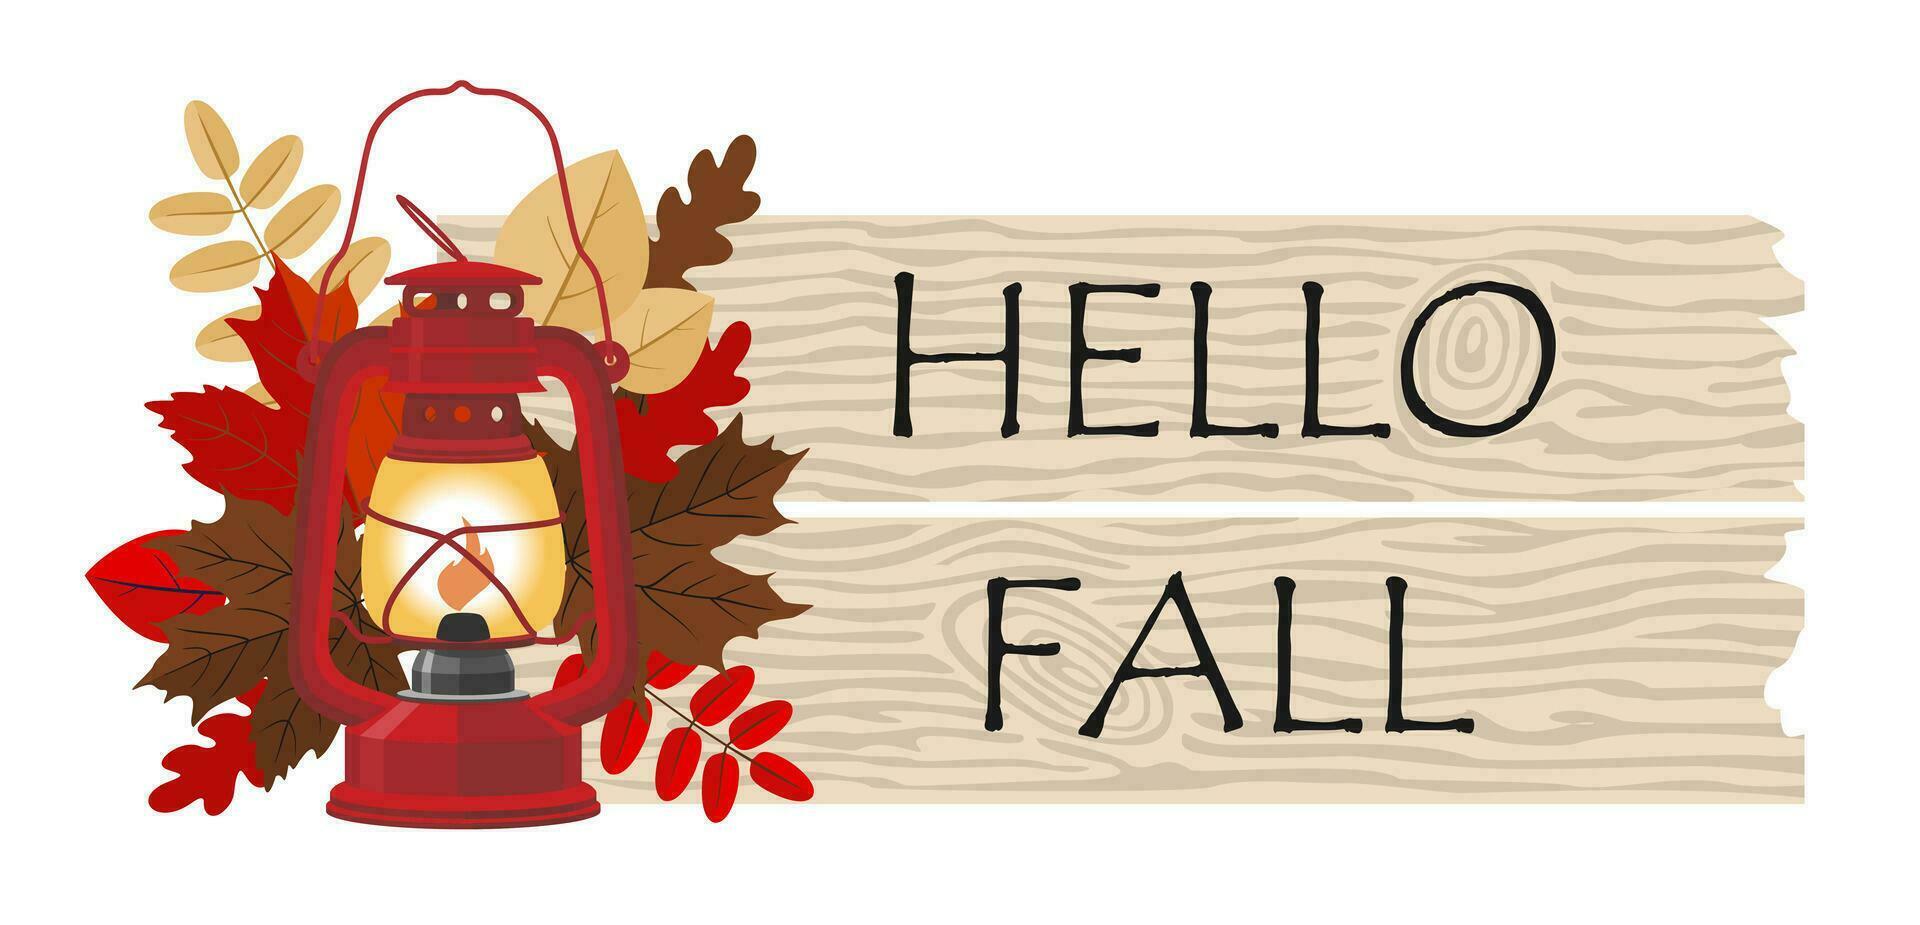 Vintage lantern with autumn leaves and wooden signage HELLO FALL. Autumn composition with oil lamp and leaves. Illustrated vector element.